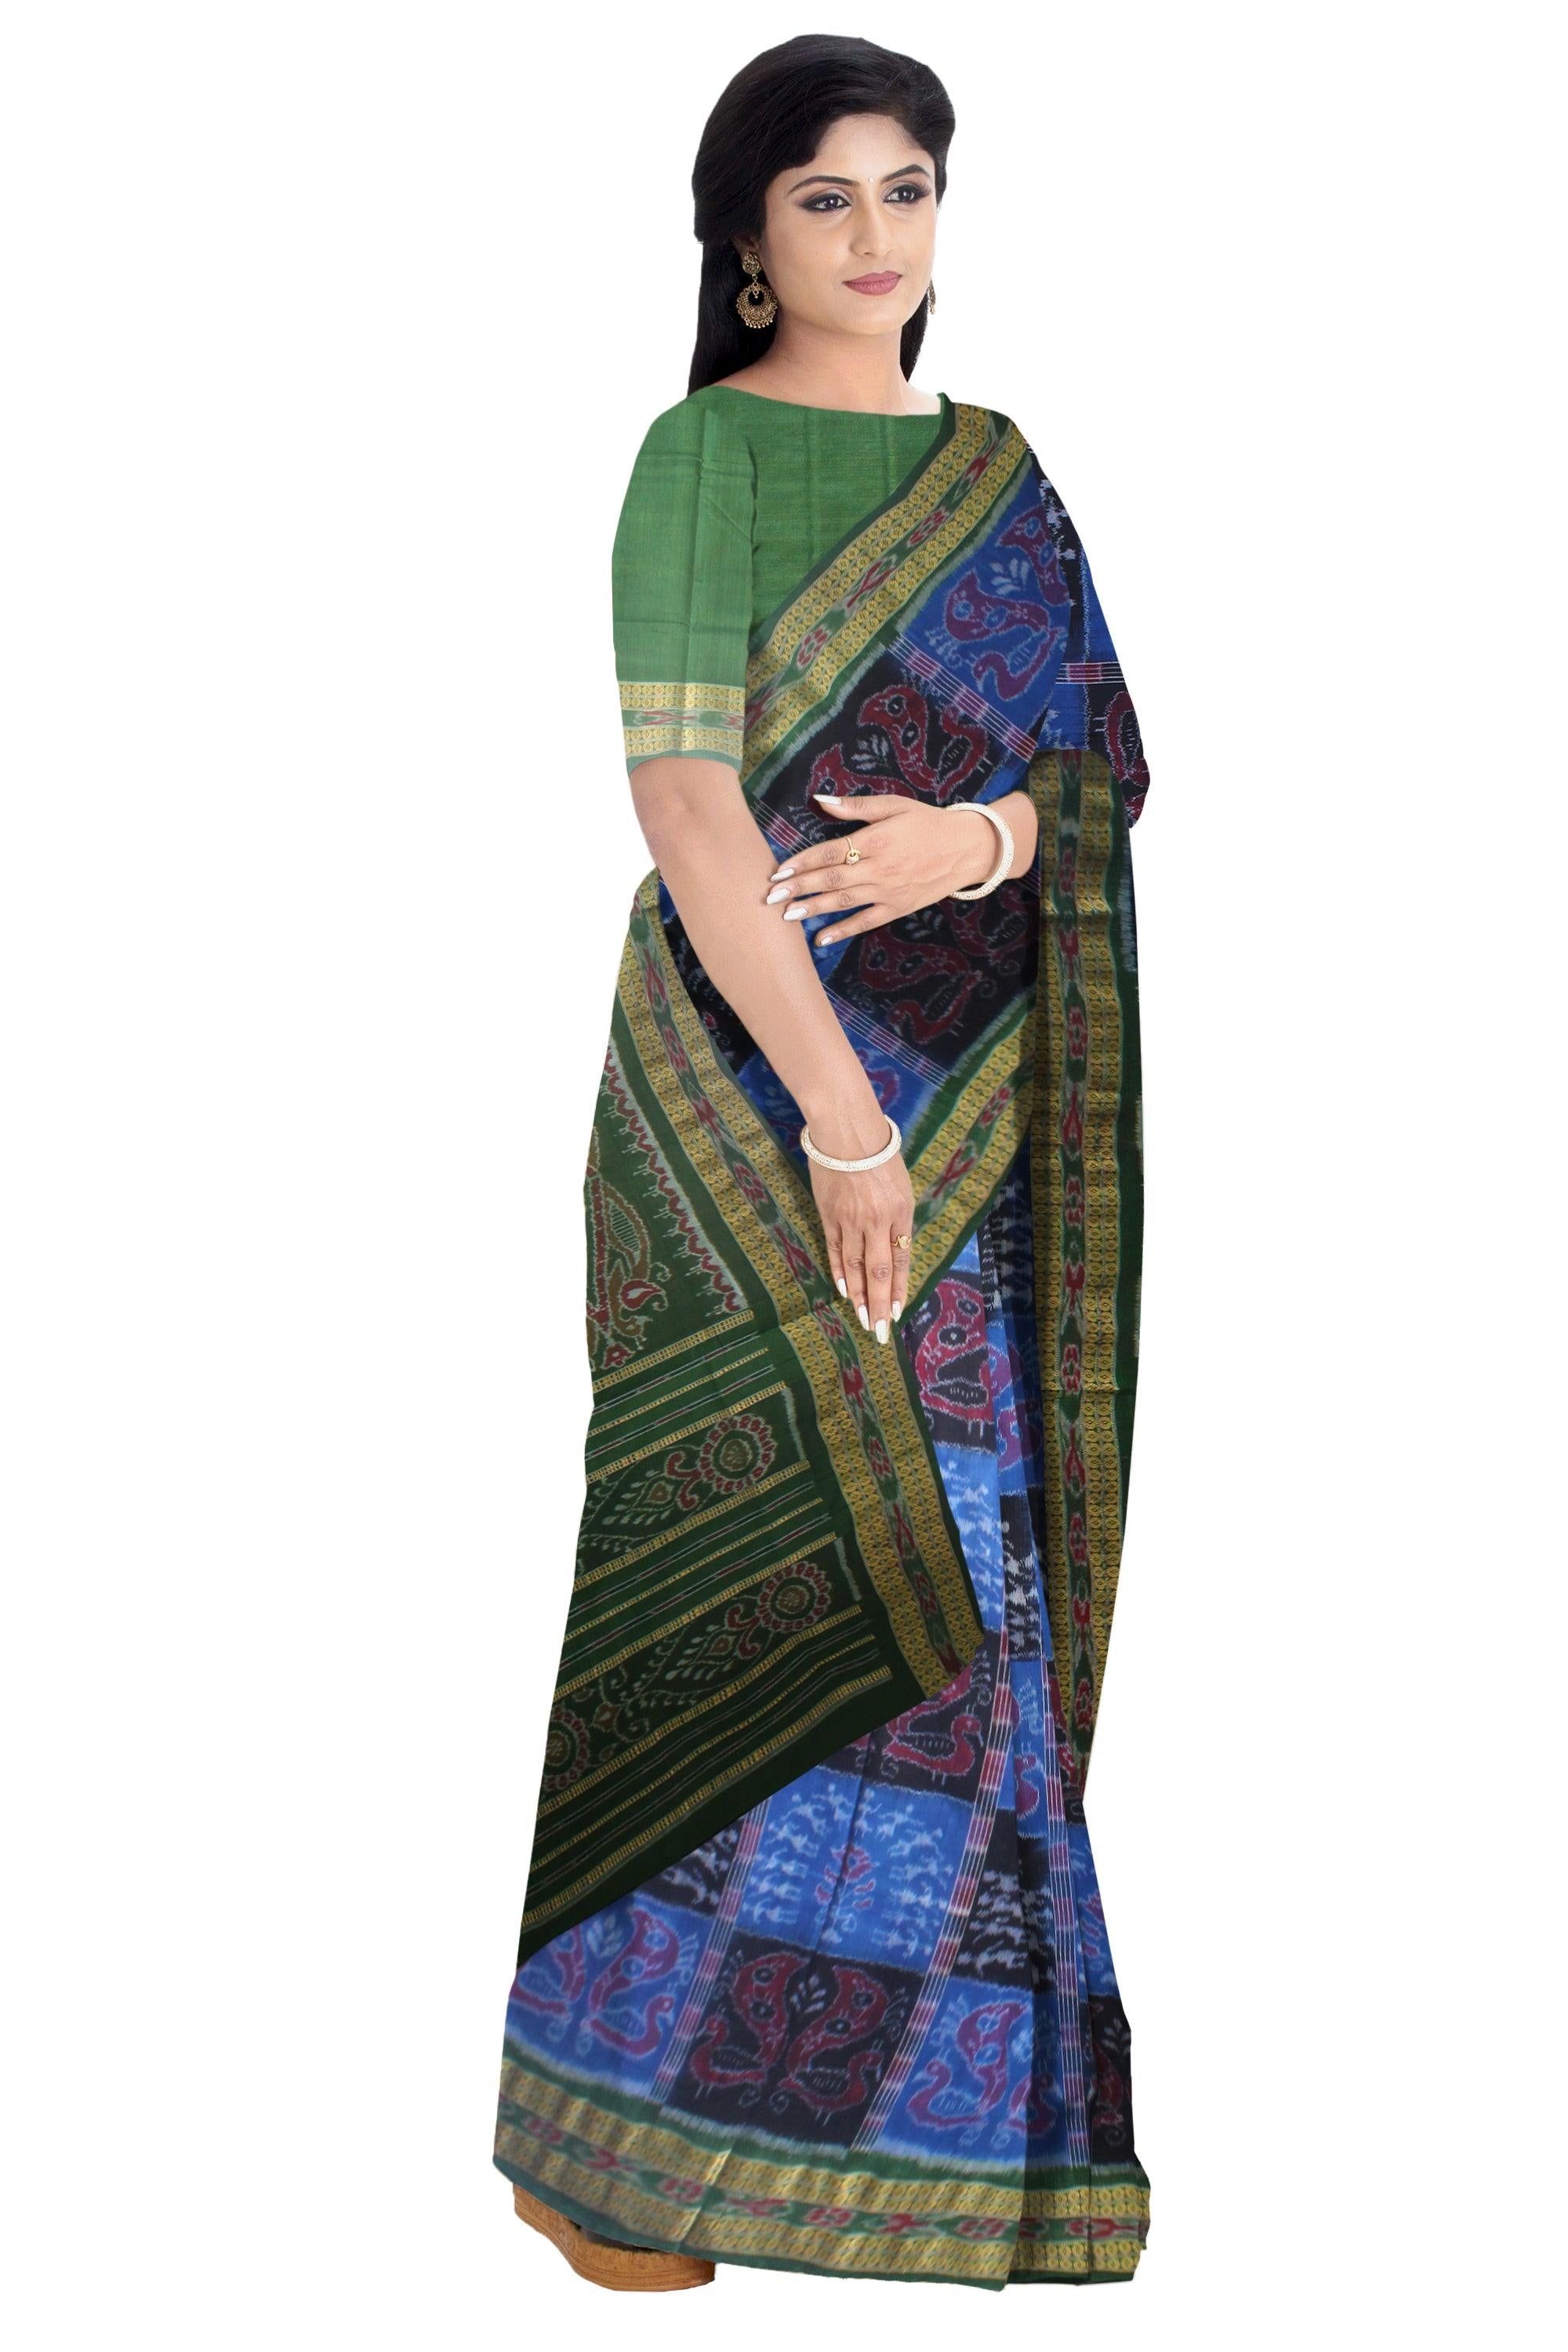 LATEST TERRACOTTA PEACOCK  DESIGN IN BLACK, BLUE AND GREEN COLOUR COTTON SAREE AVAILABLE WITH BLOUSE PIECE. - Koshali Arts & Crafts Enterprise